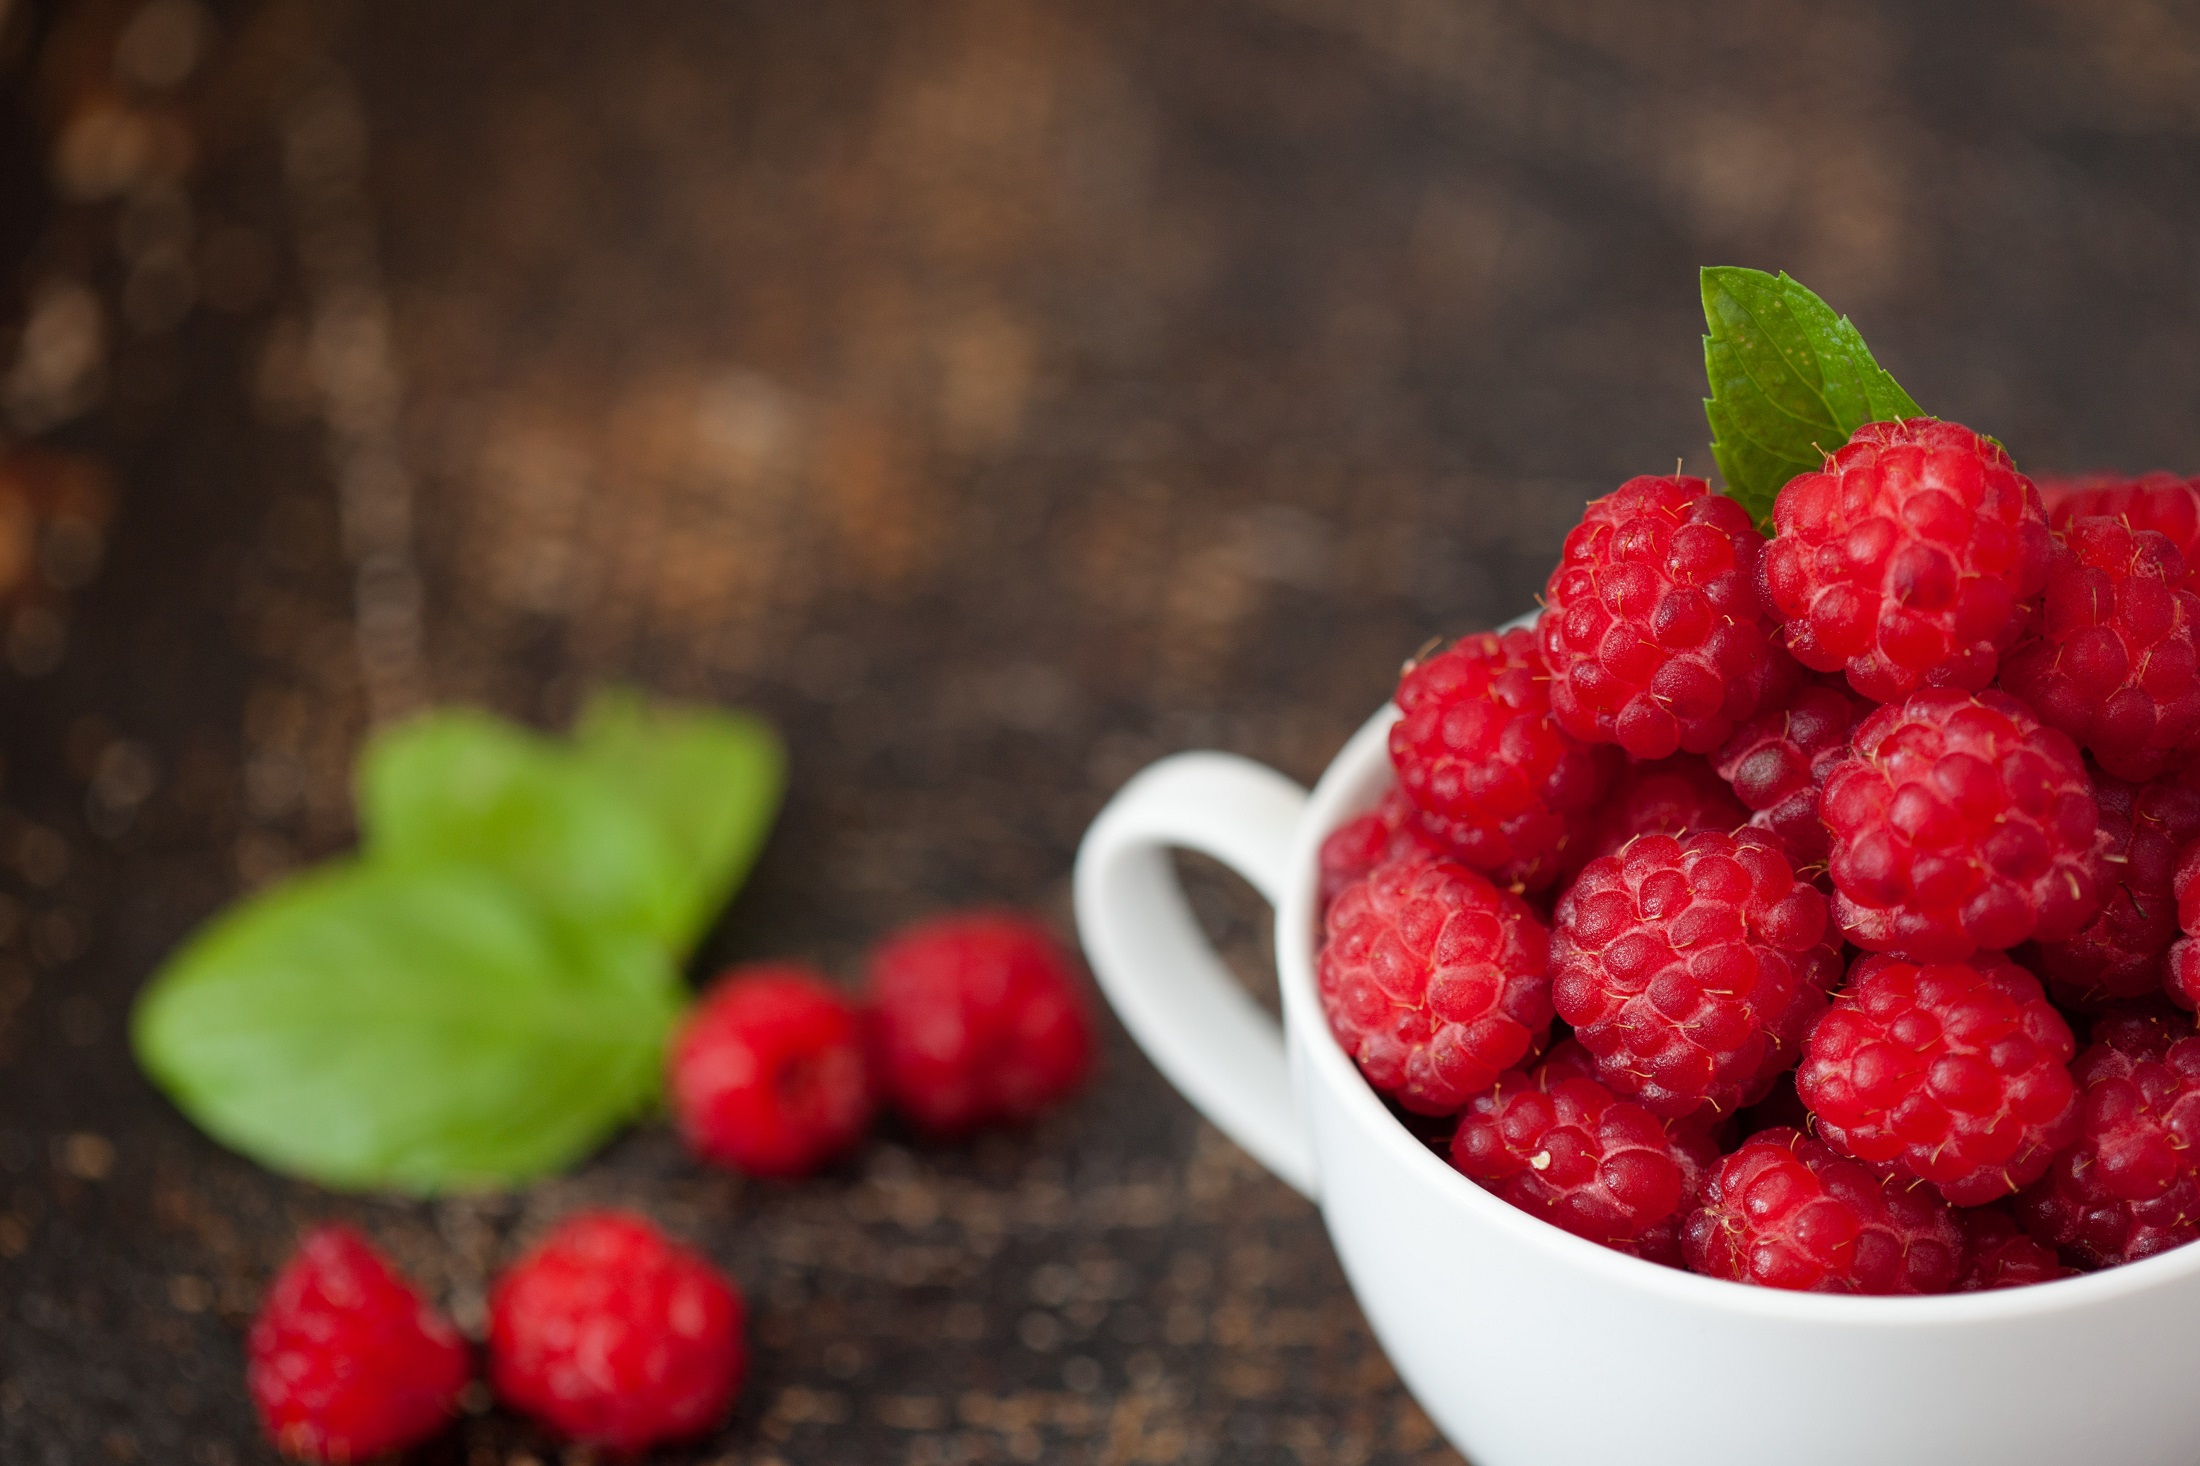 Raspberries for beauty. We will tell you how to use raspberries to make your own cosmetics